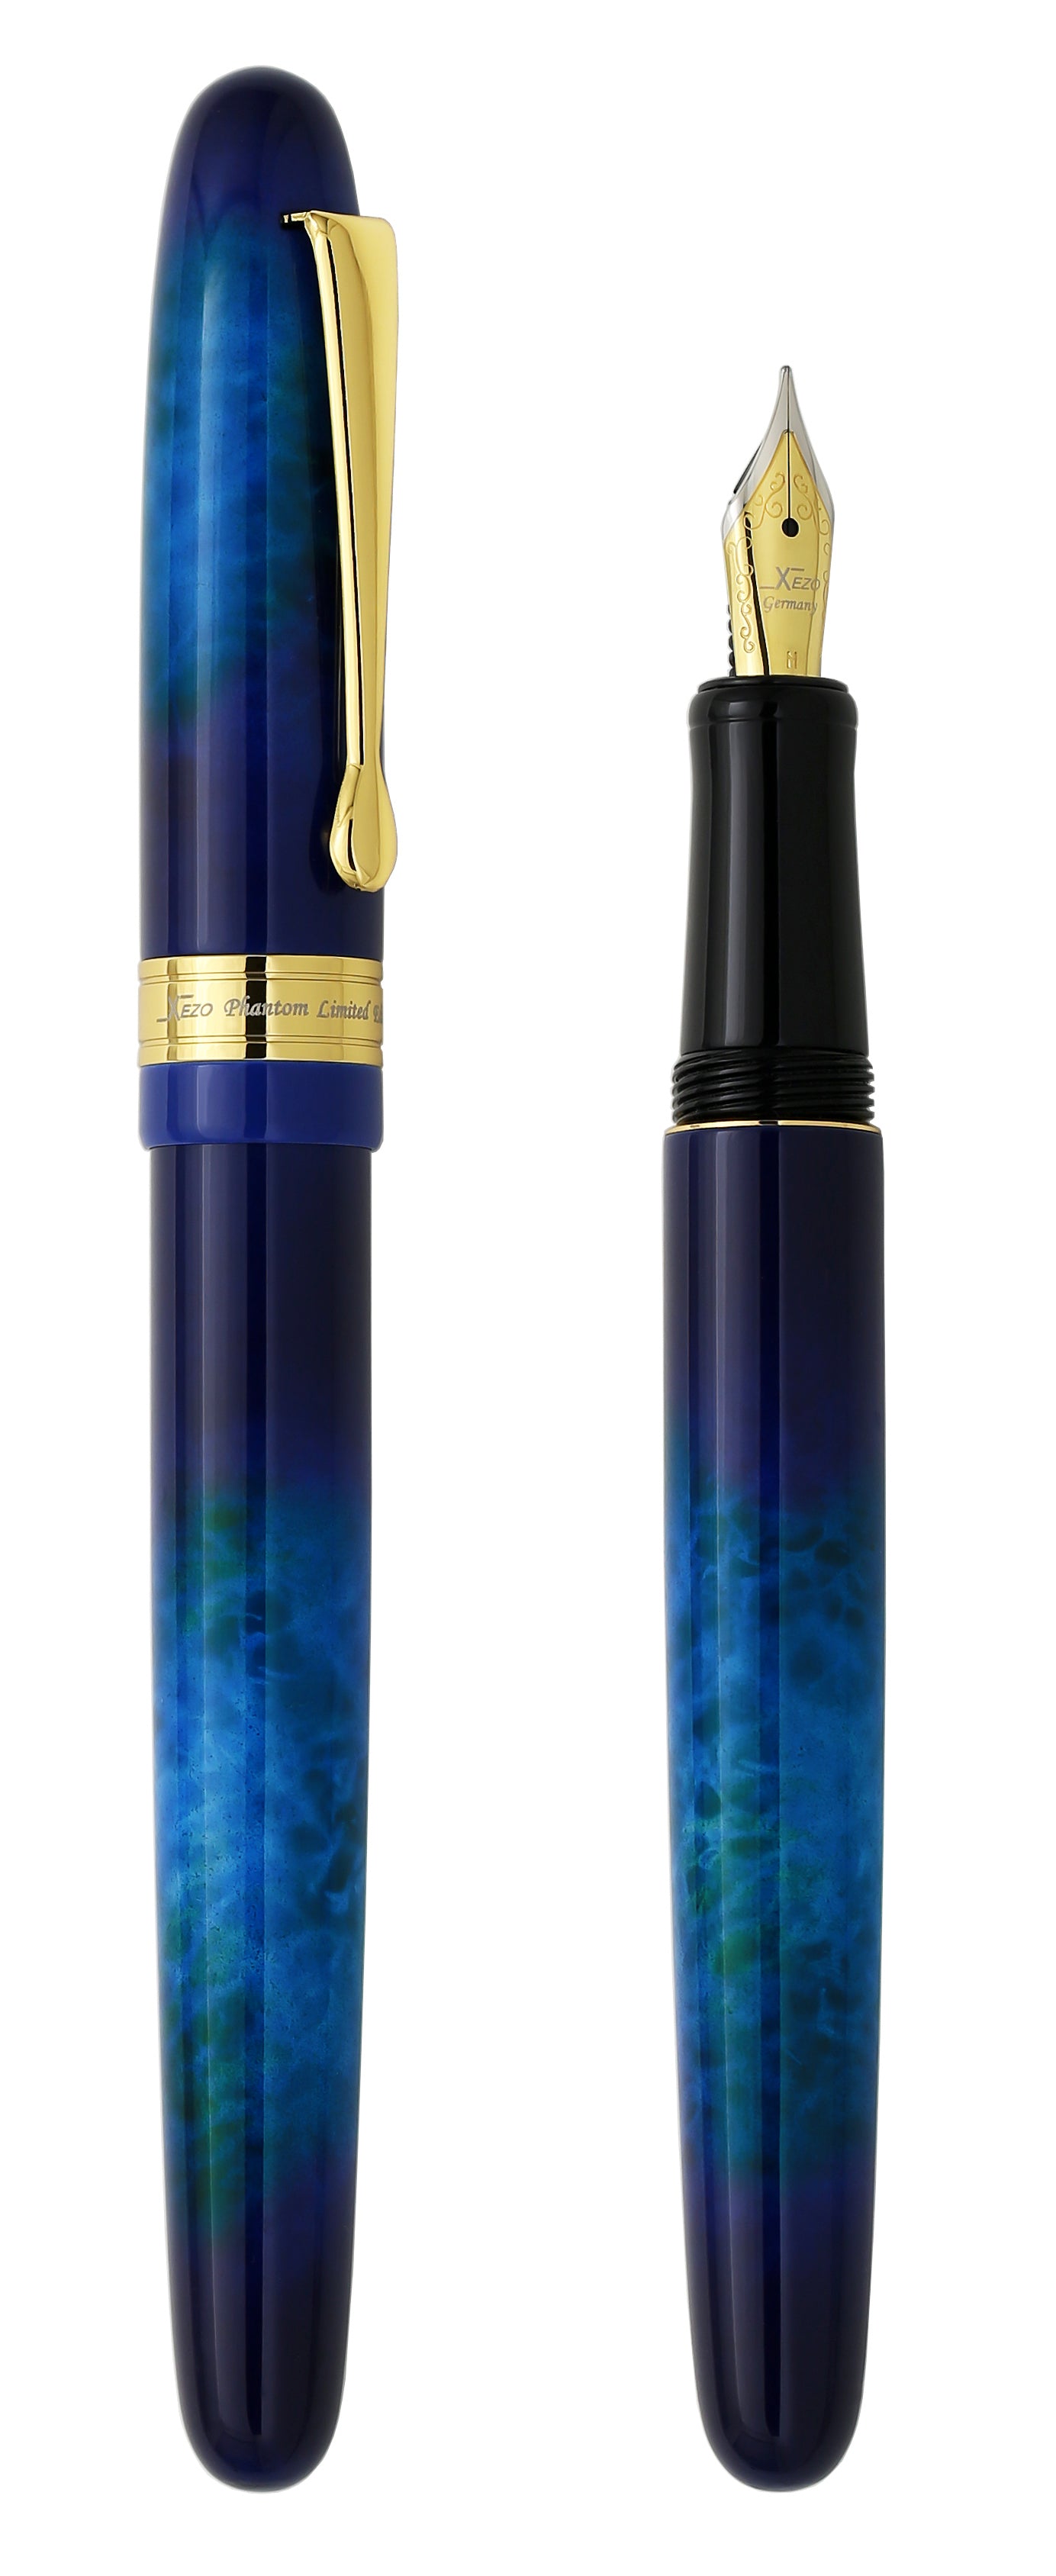 Xezo – Comparison between 3/4 view of the capped and uncapped Phantom Stardust M fountain pens